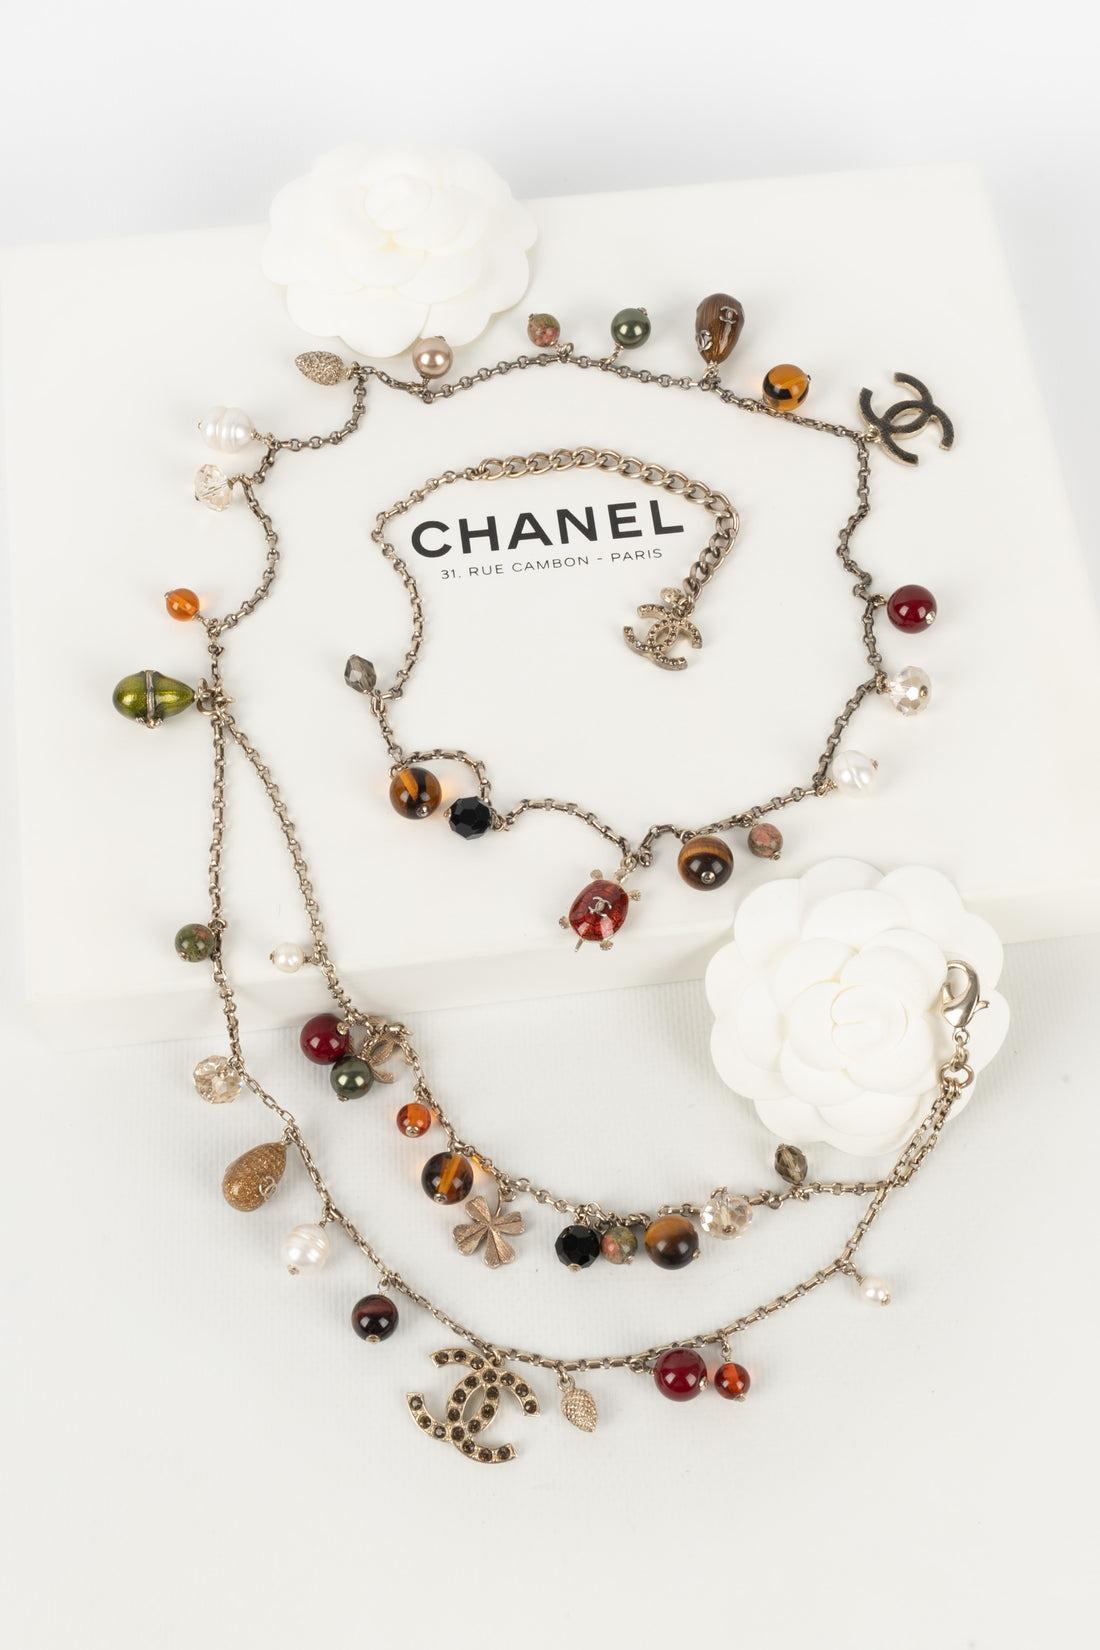 Chanel Belt in Silvery Metal Belt Ornamented with Charms and Pearls, 2007 For Sale 7